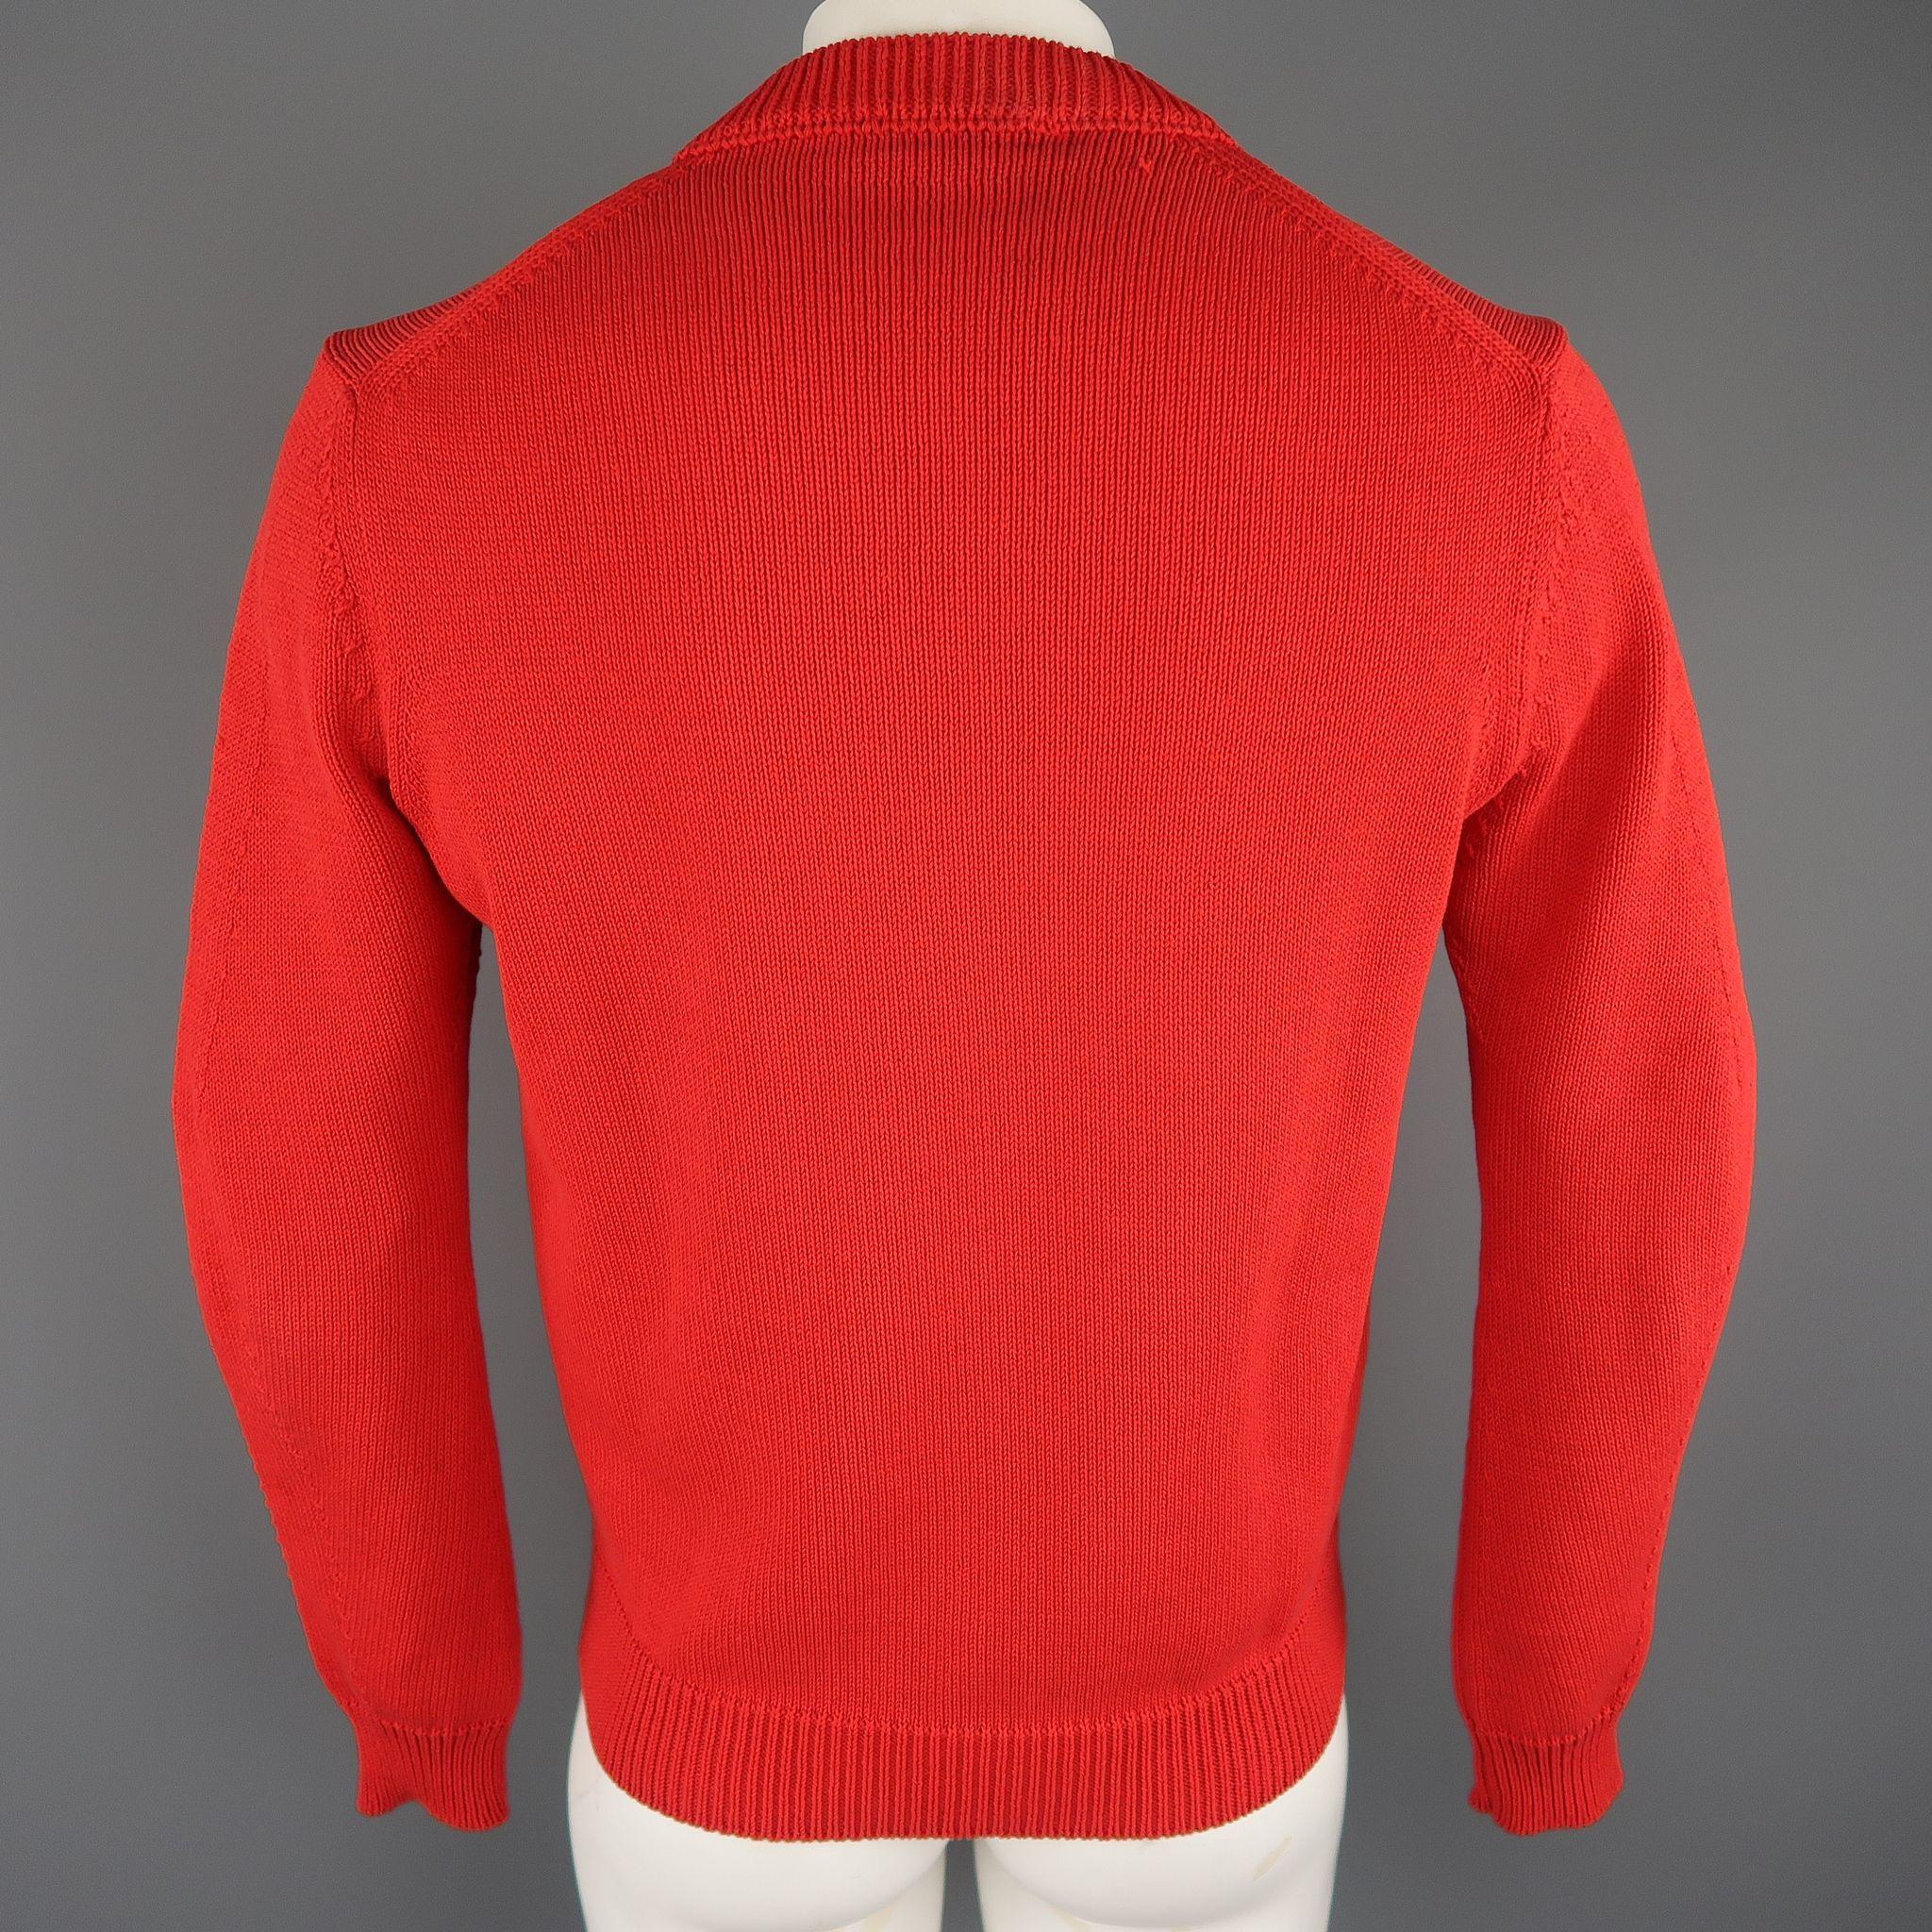 Men's JIL SANDER Size M Red Knitted Cotton Pullover Sweater